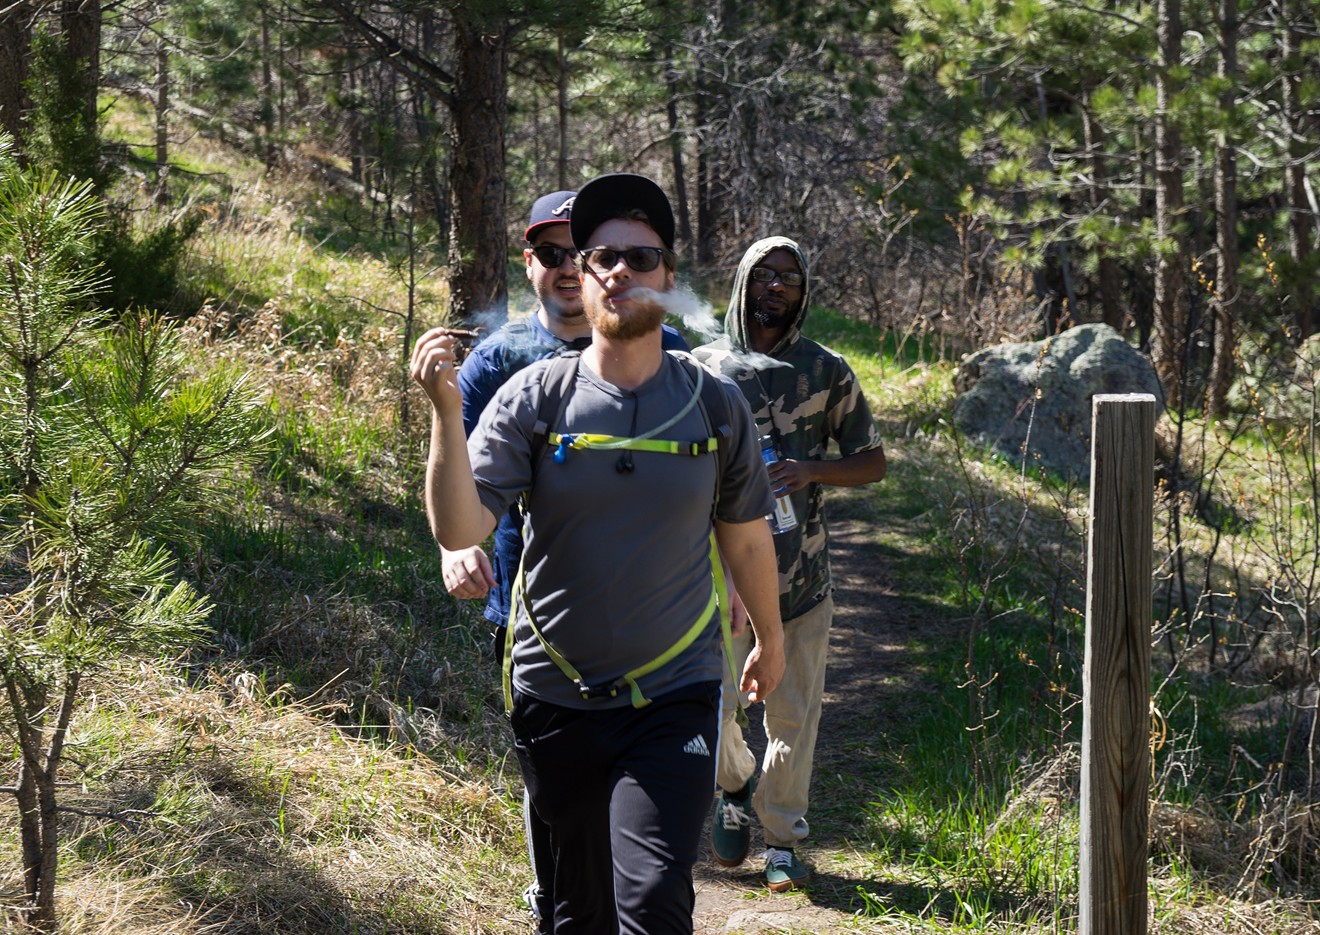 CannaVenture is a cannabis-friendly group for hikers, disc golfers and outdoor lovers.